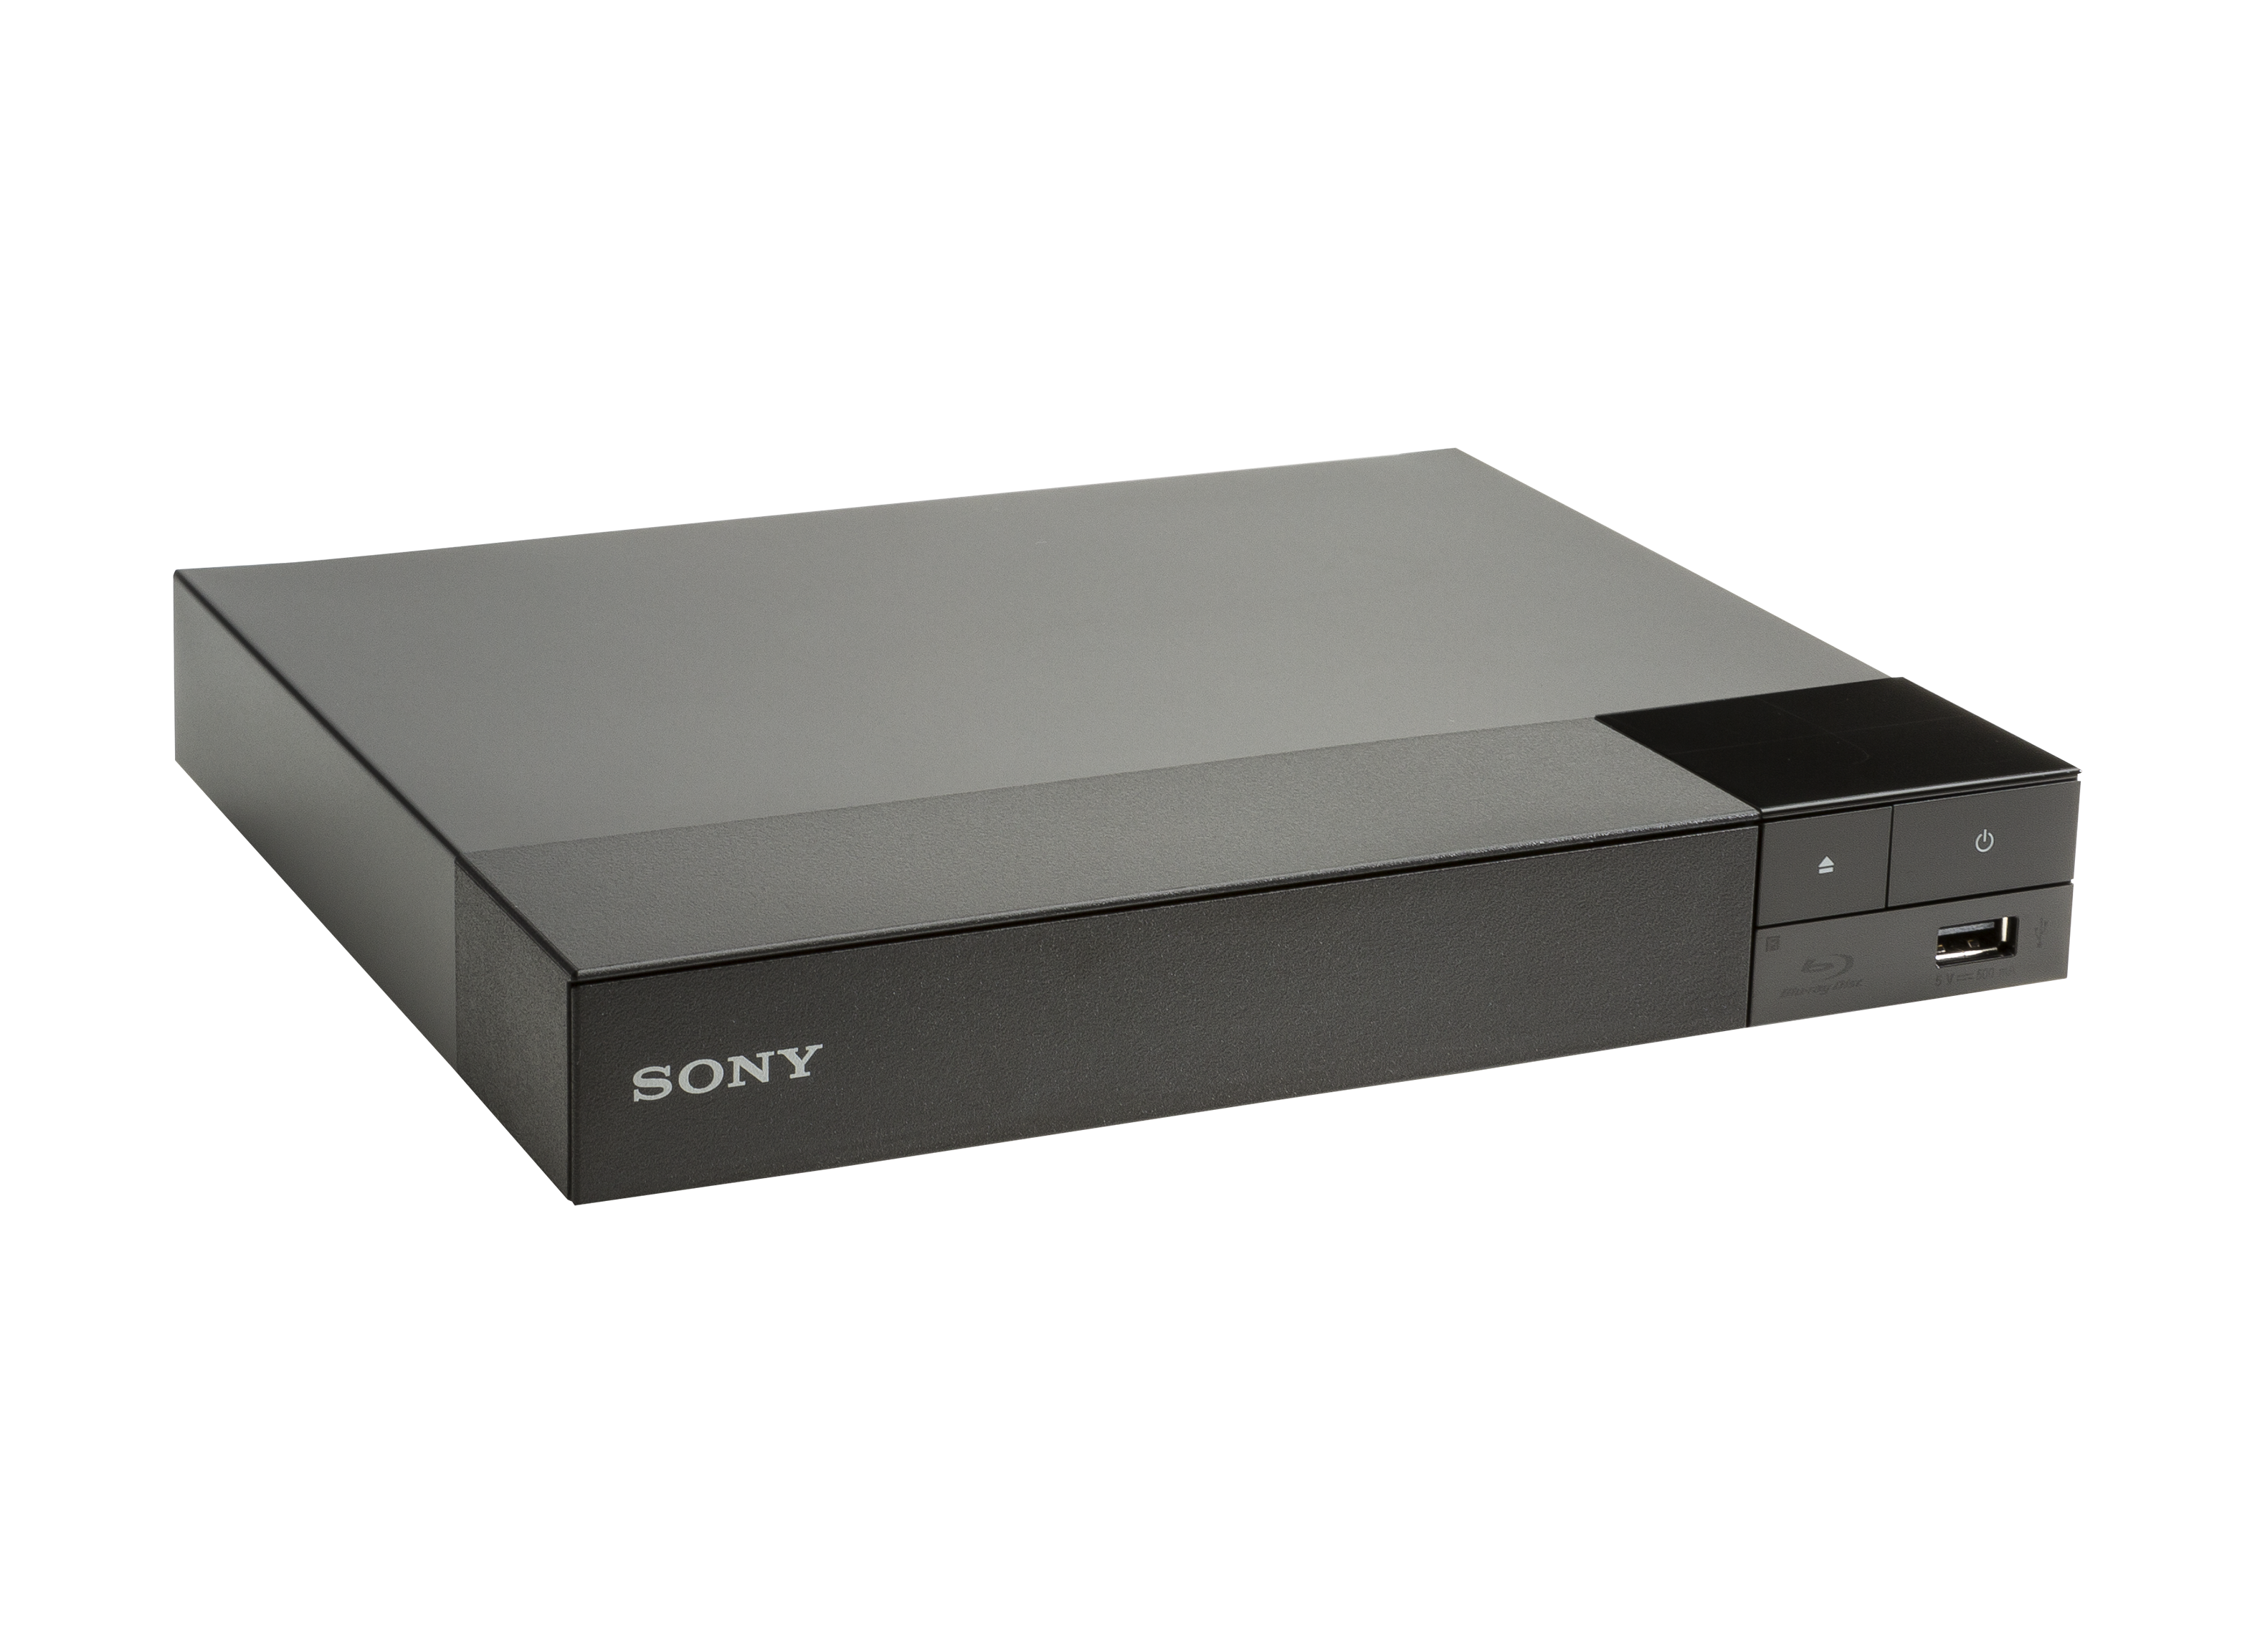 Sony BDP-S3700 Blu-Ray Player Review - Consumer Reports